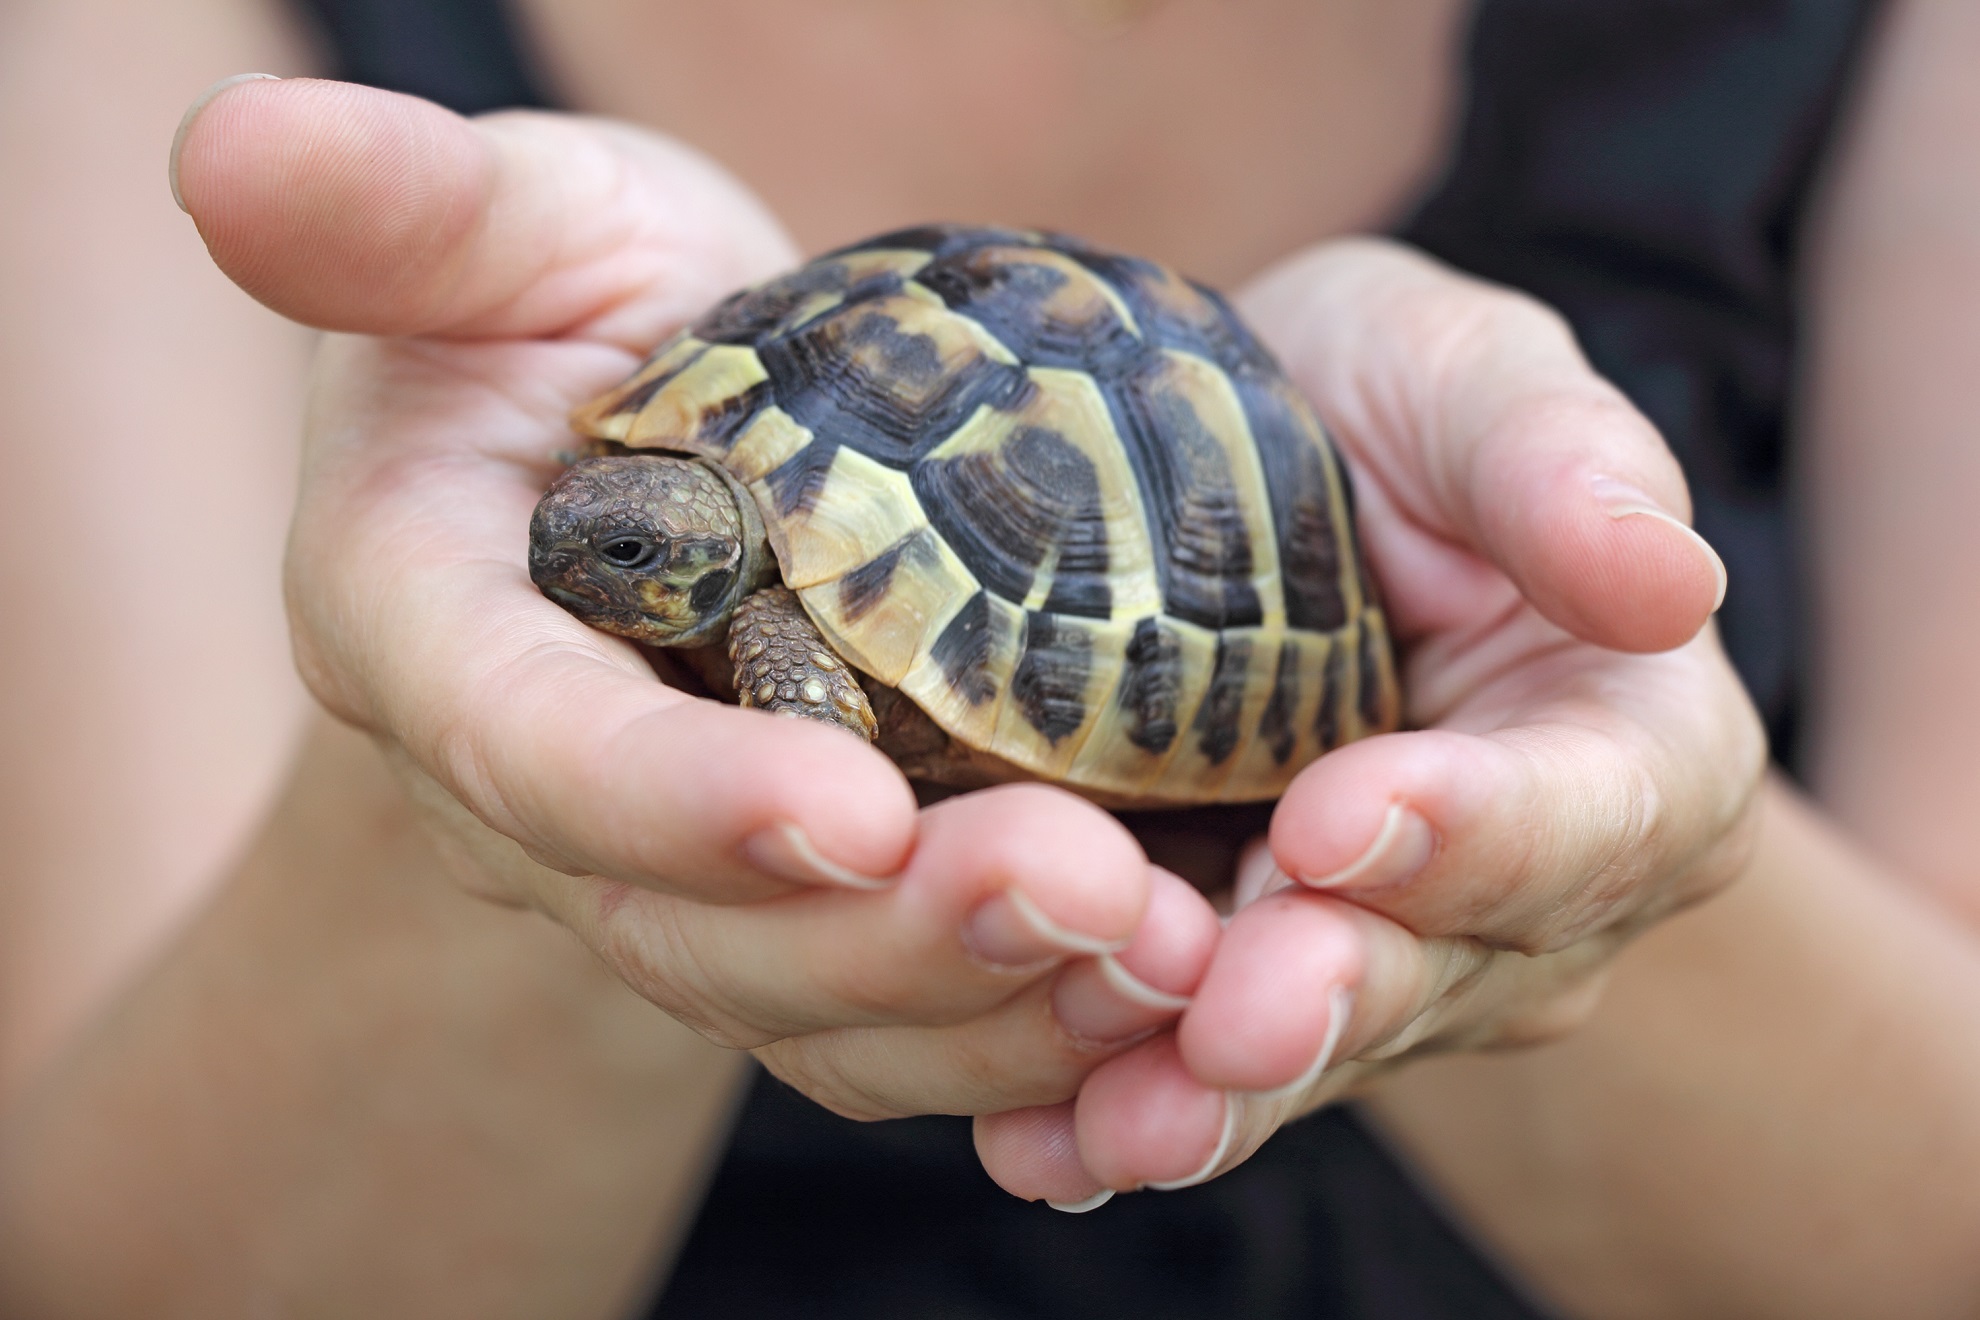 Salmonella Outbreaks Linked to Small Turtles